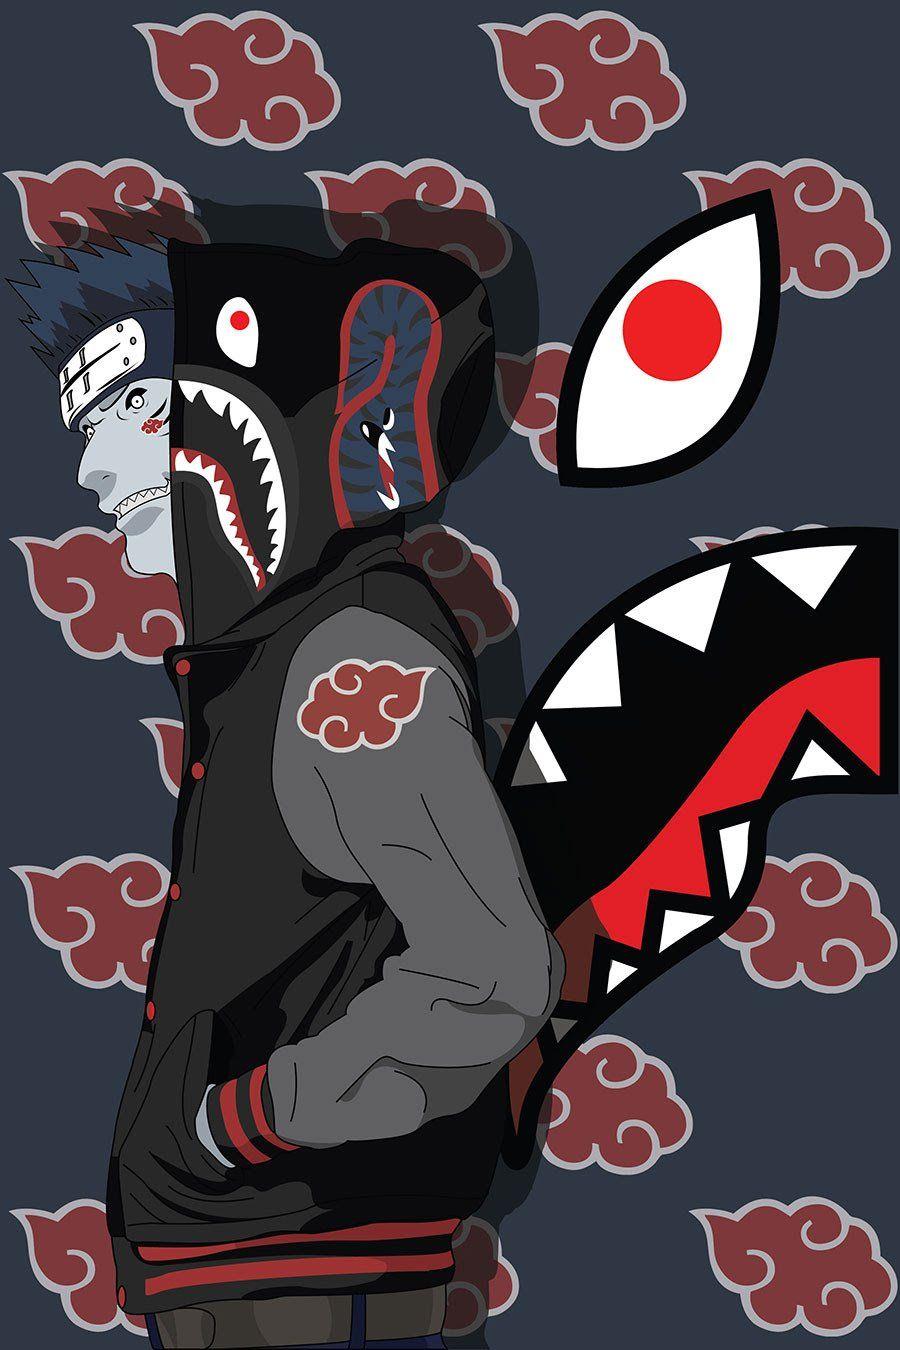 Kakashi Supreme Wallpapers Wallpaper Cave Here we present more than amazing background images and wallpapers carefully picked by our. kakashi supreme wallpapers wallpaper cave